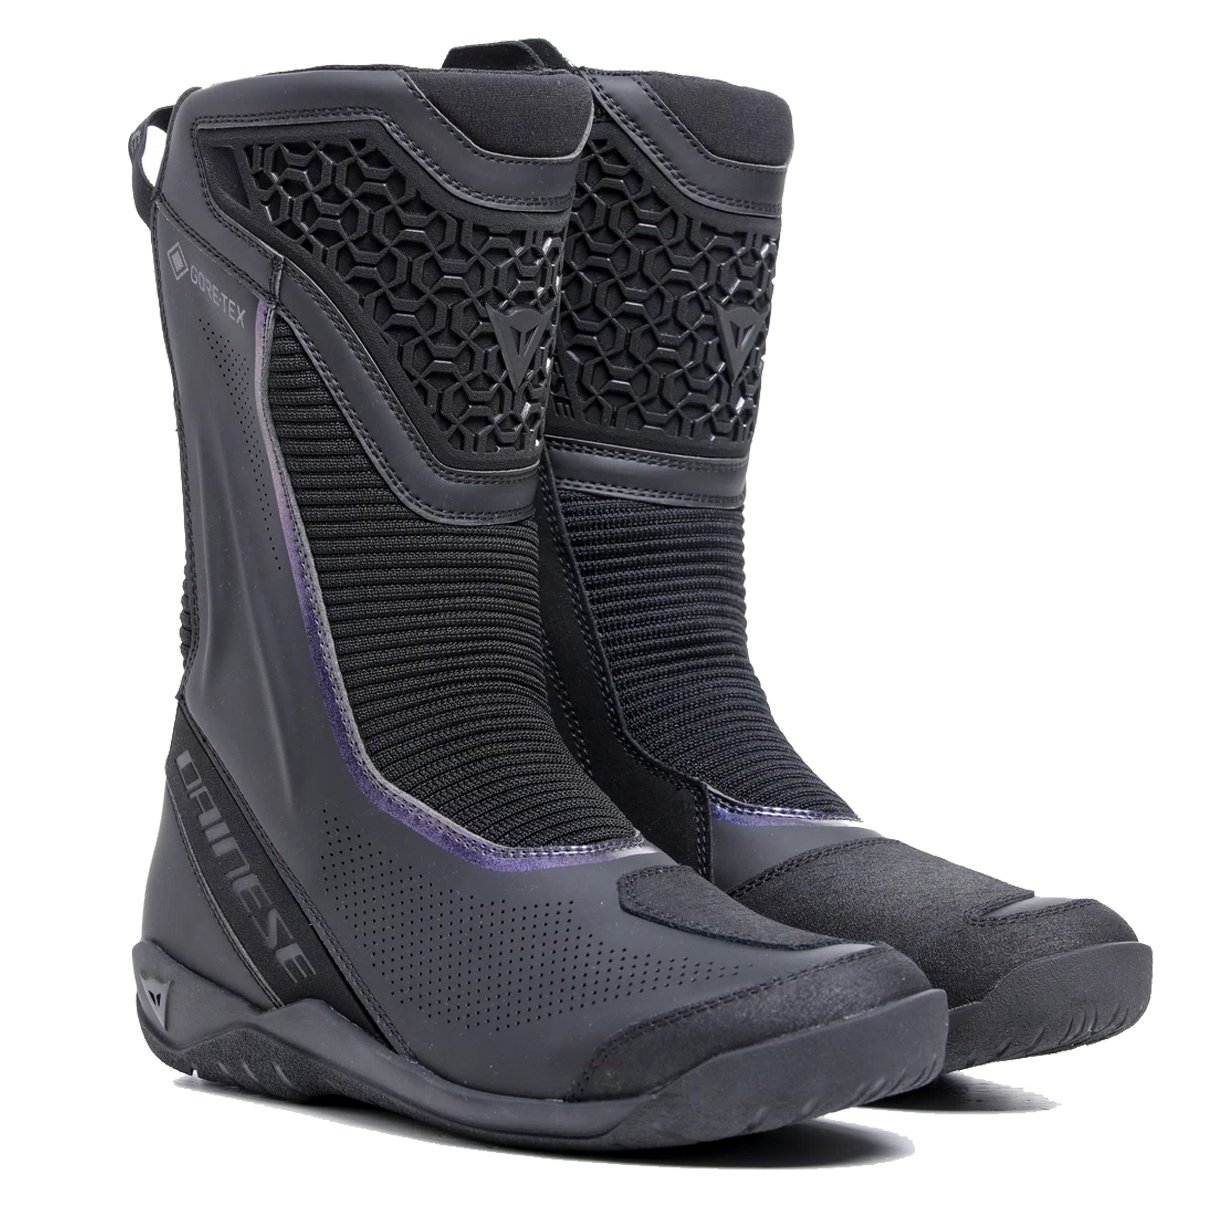 Image of Dainese Freeland 2 Gore-Tex Boots Wmn Black Size 42 ID 8051019693150